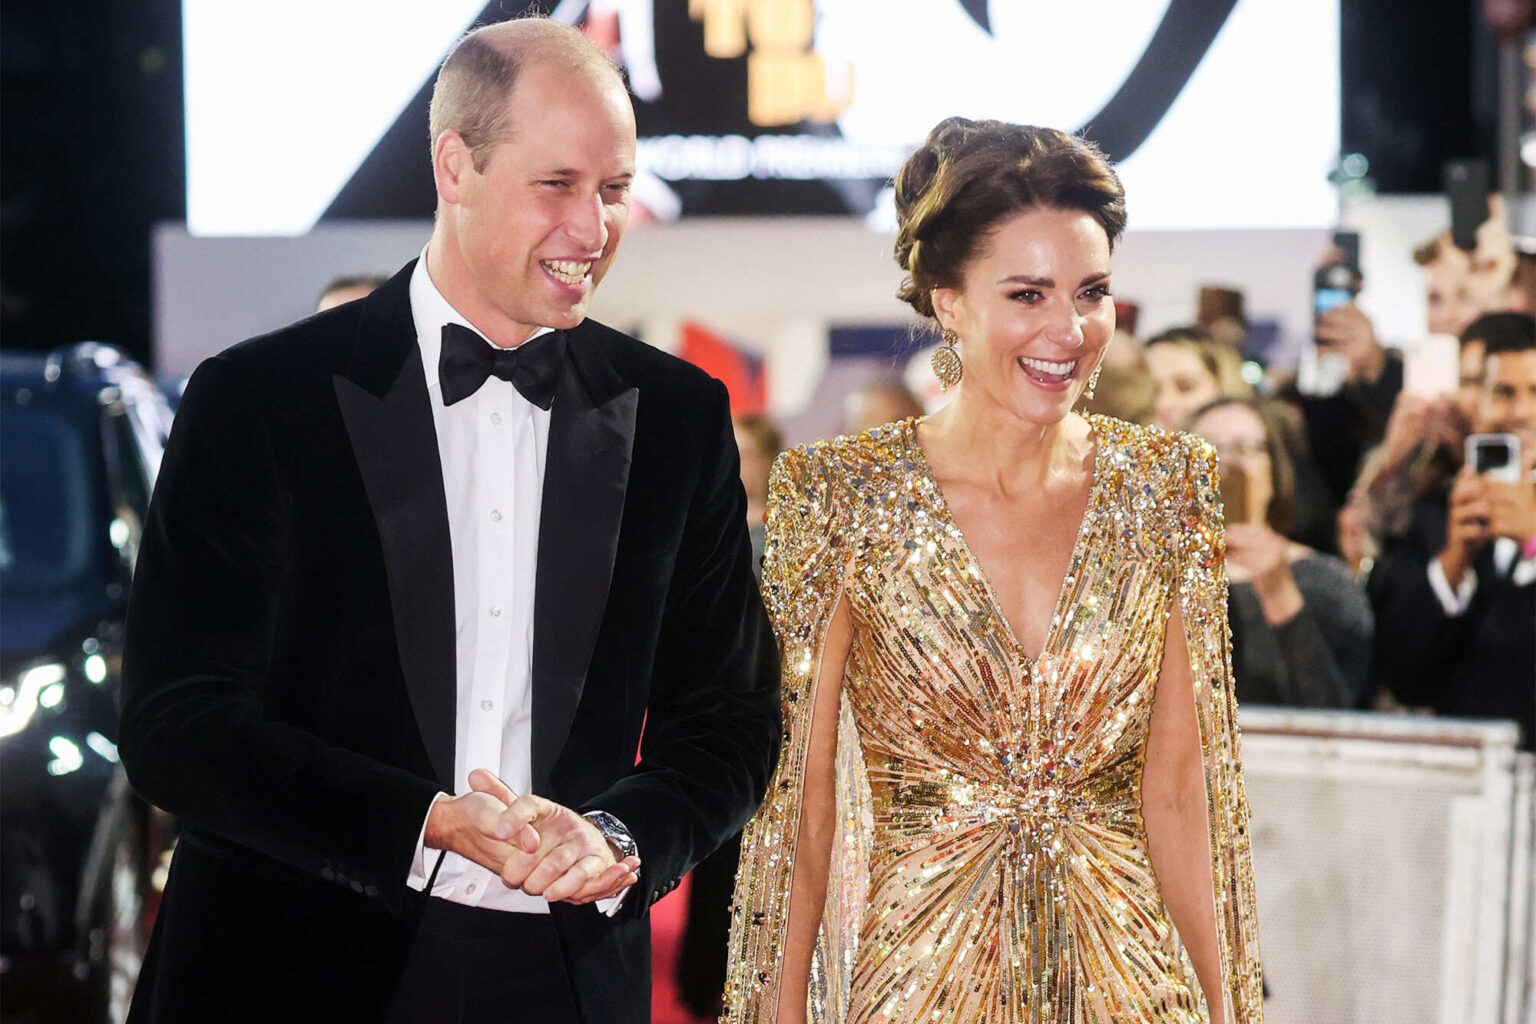 Although Kate Middleton and Prince William stunned at the premiere of 'No Time to Die', we're still wondering if Prince Andrew is in their lives. Is he?